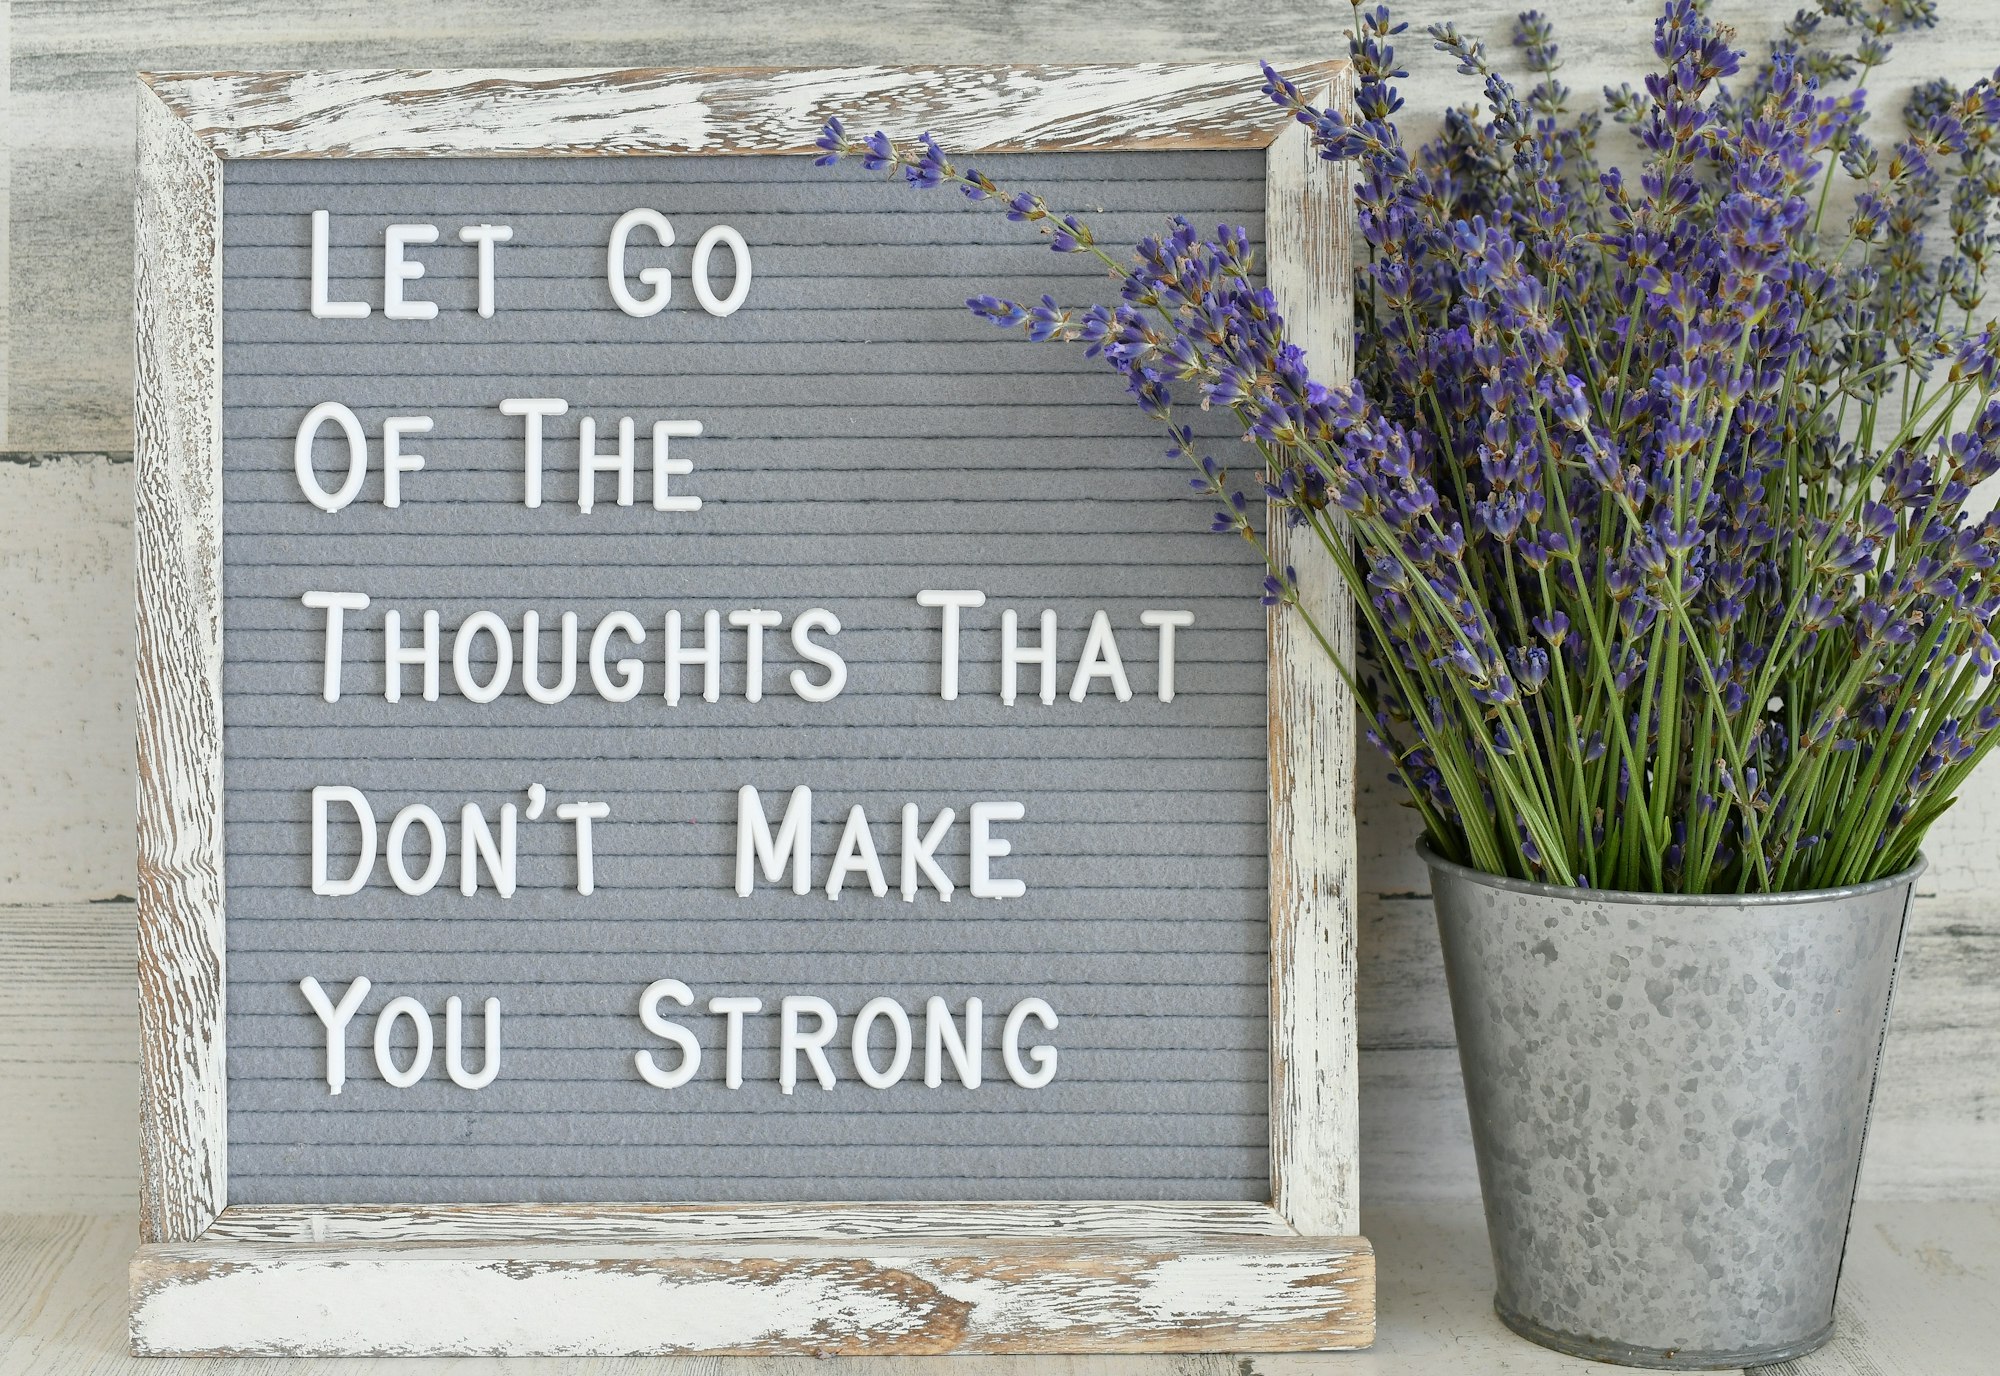 "Let go of the thoughts that don't make you strong" on a gray message board next to lavender bouquet